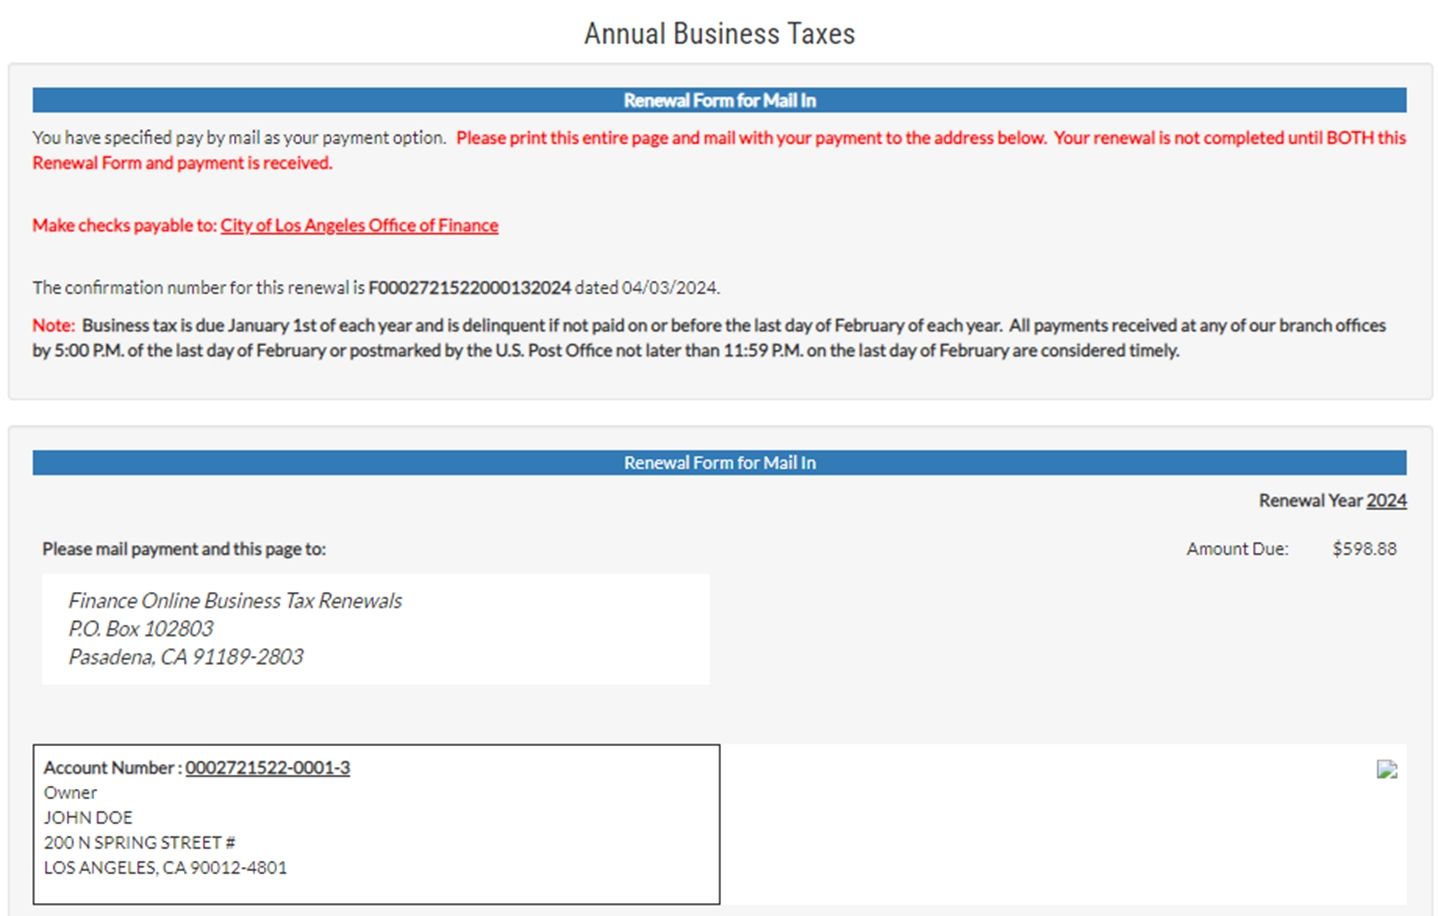 Annual Business Taxes E-File payment options Continued